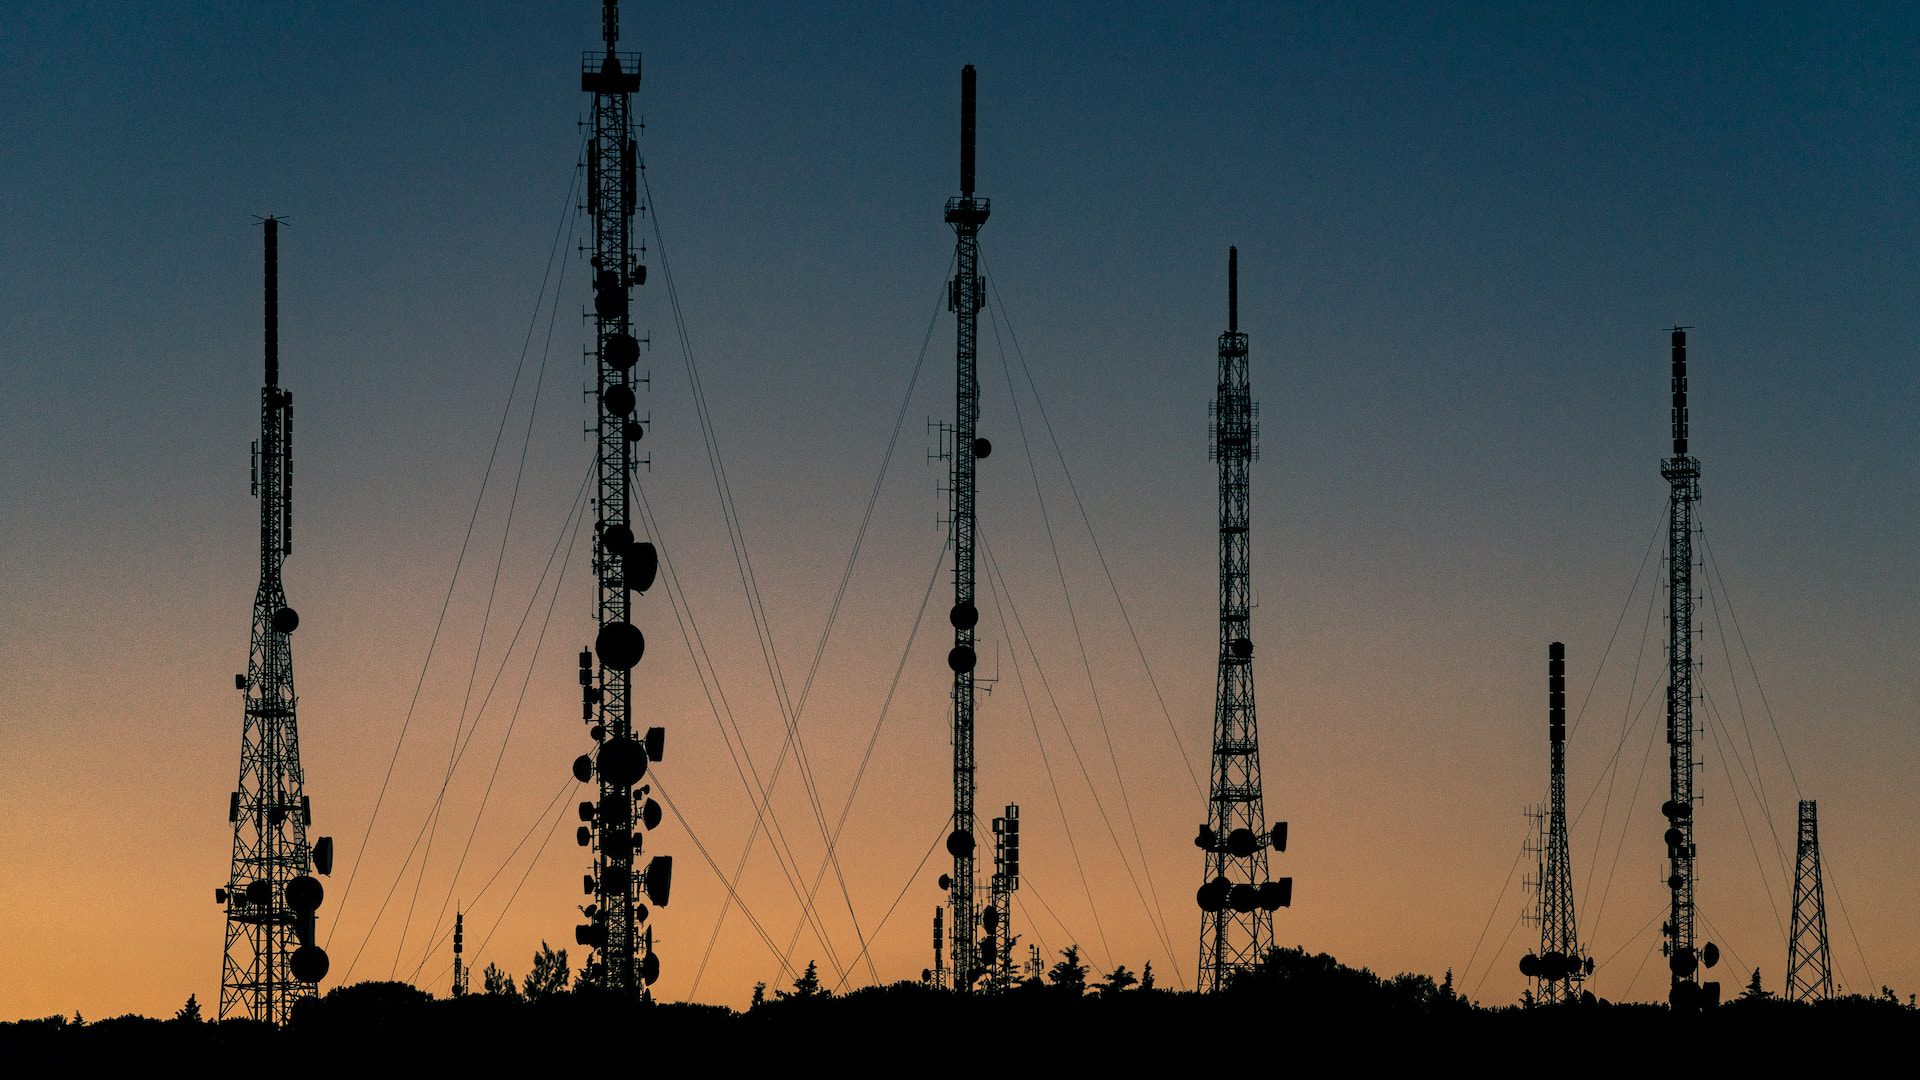 A landscape photo of several cellular towers set to the backdrop of sunset